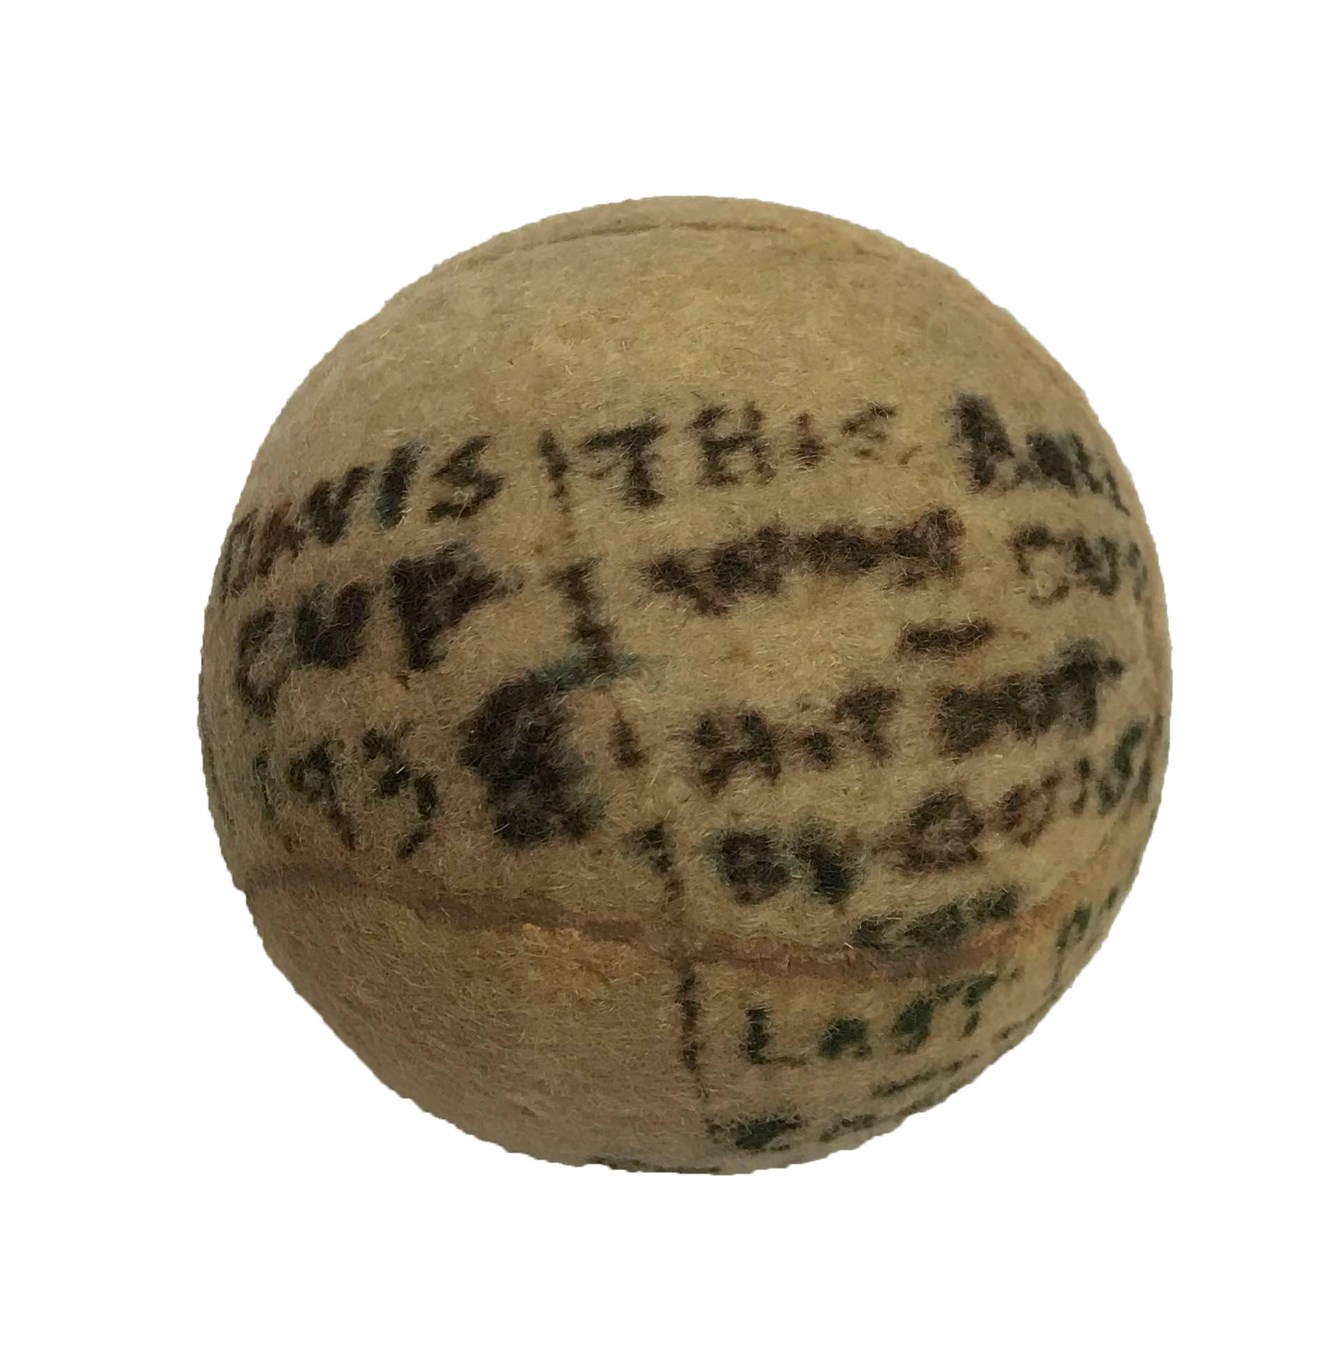 Olympics and All Sports - 1938 Davis Cup Winning "Last Point" Trophy Ball & Incredible Collection of Tennis Ephemera - from Estate of Line Judge Ellwood M. Powell